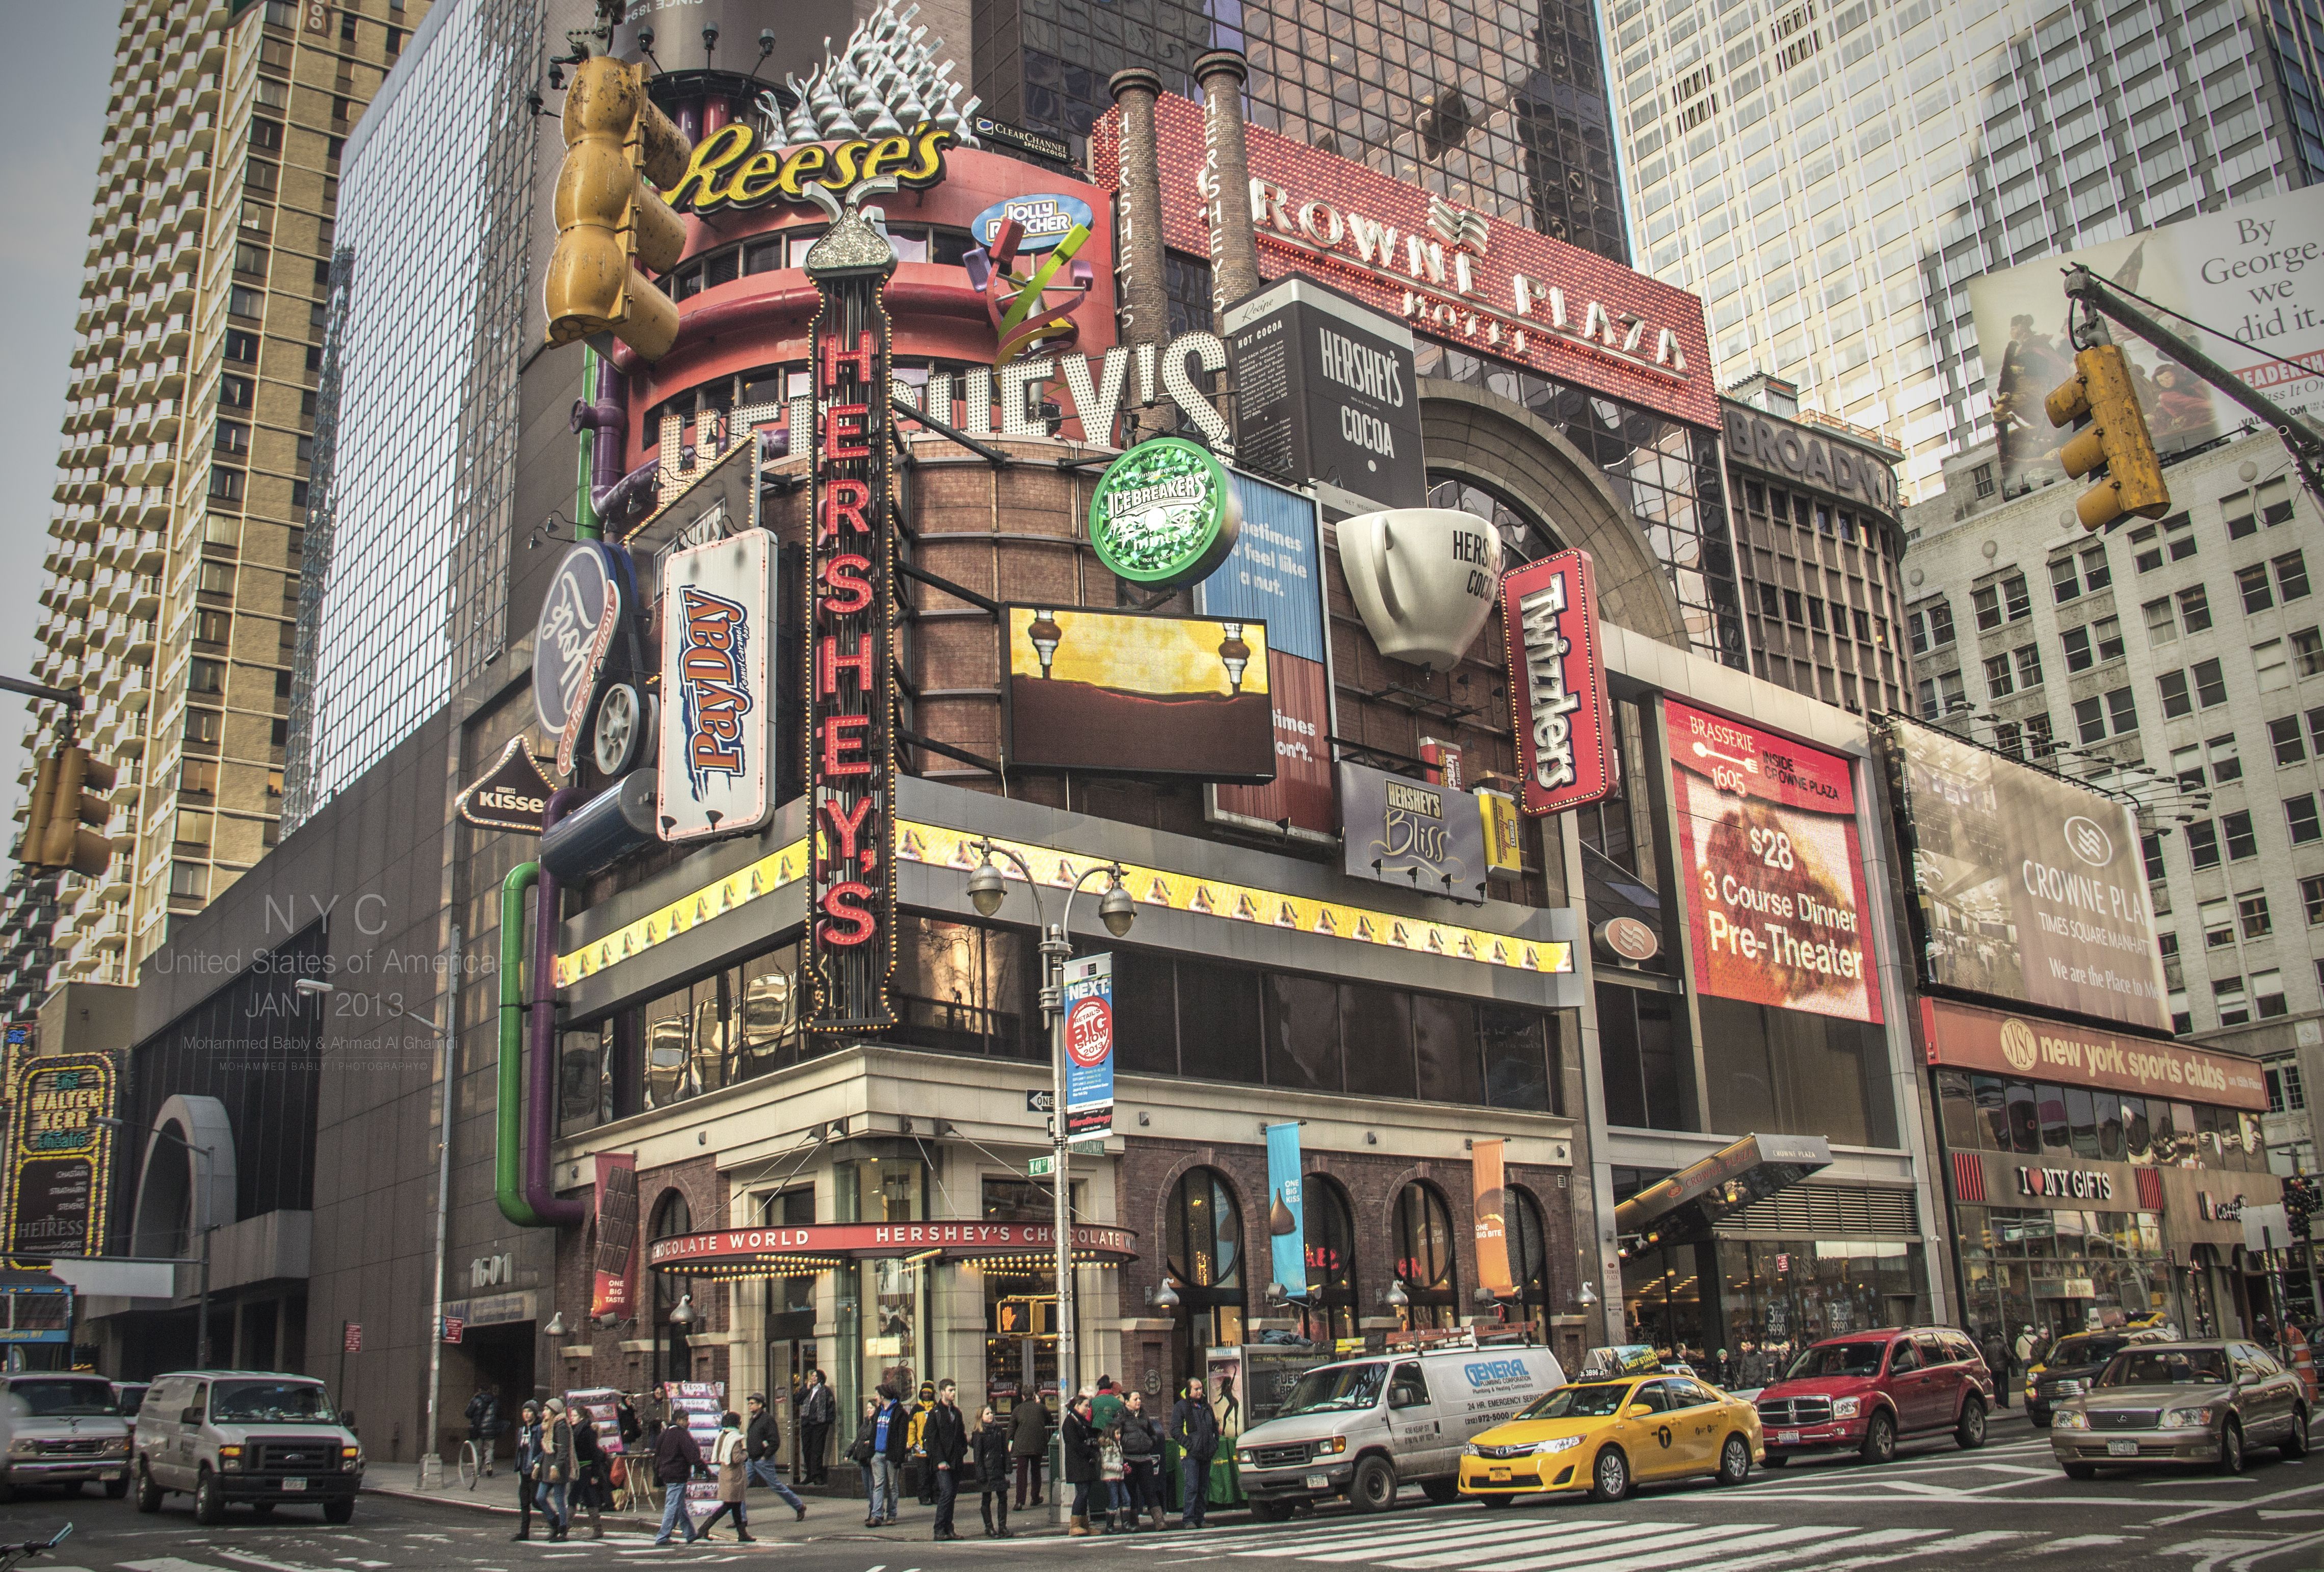 Exterior photo of the Hershey's store in Times Square